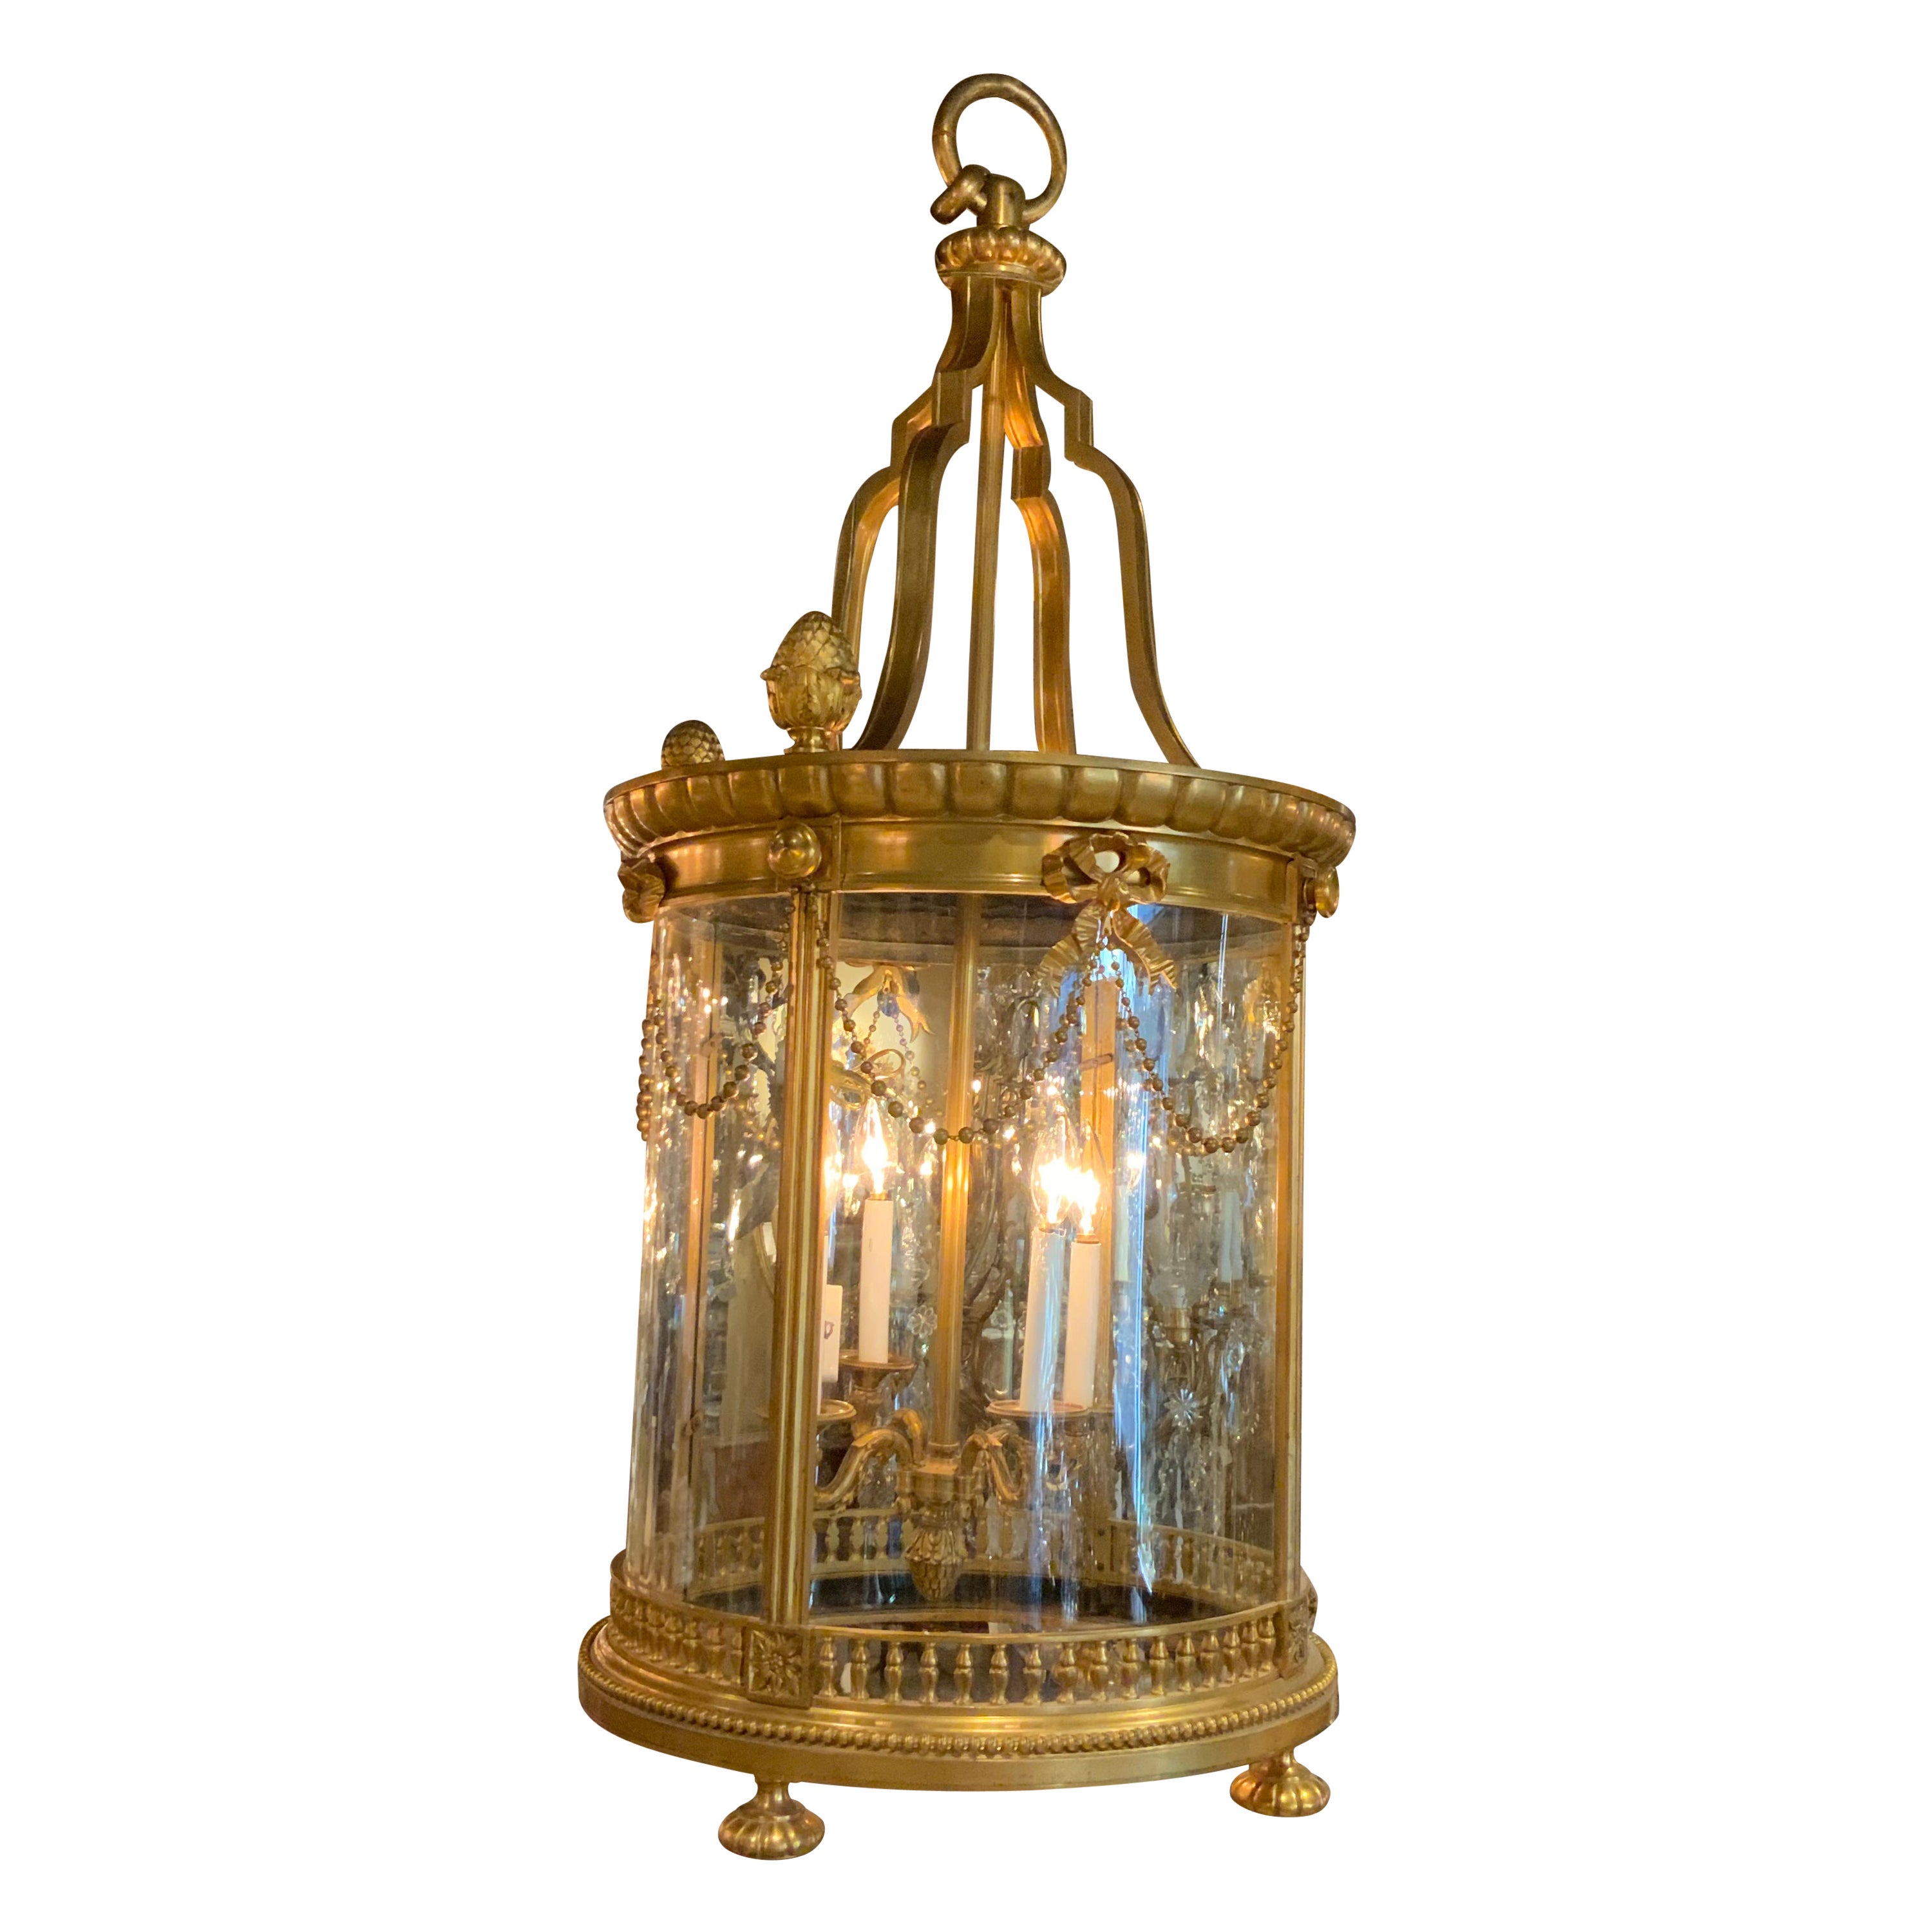 Palace Size Impressive Bronze Dore Lantern 19th C. with Bows and Swags 4 Lights